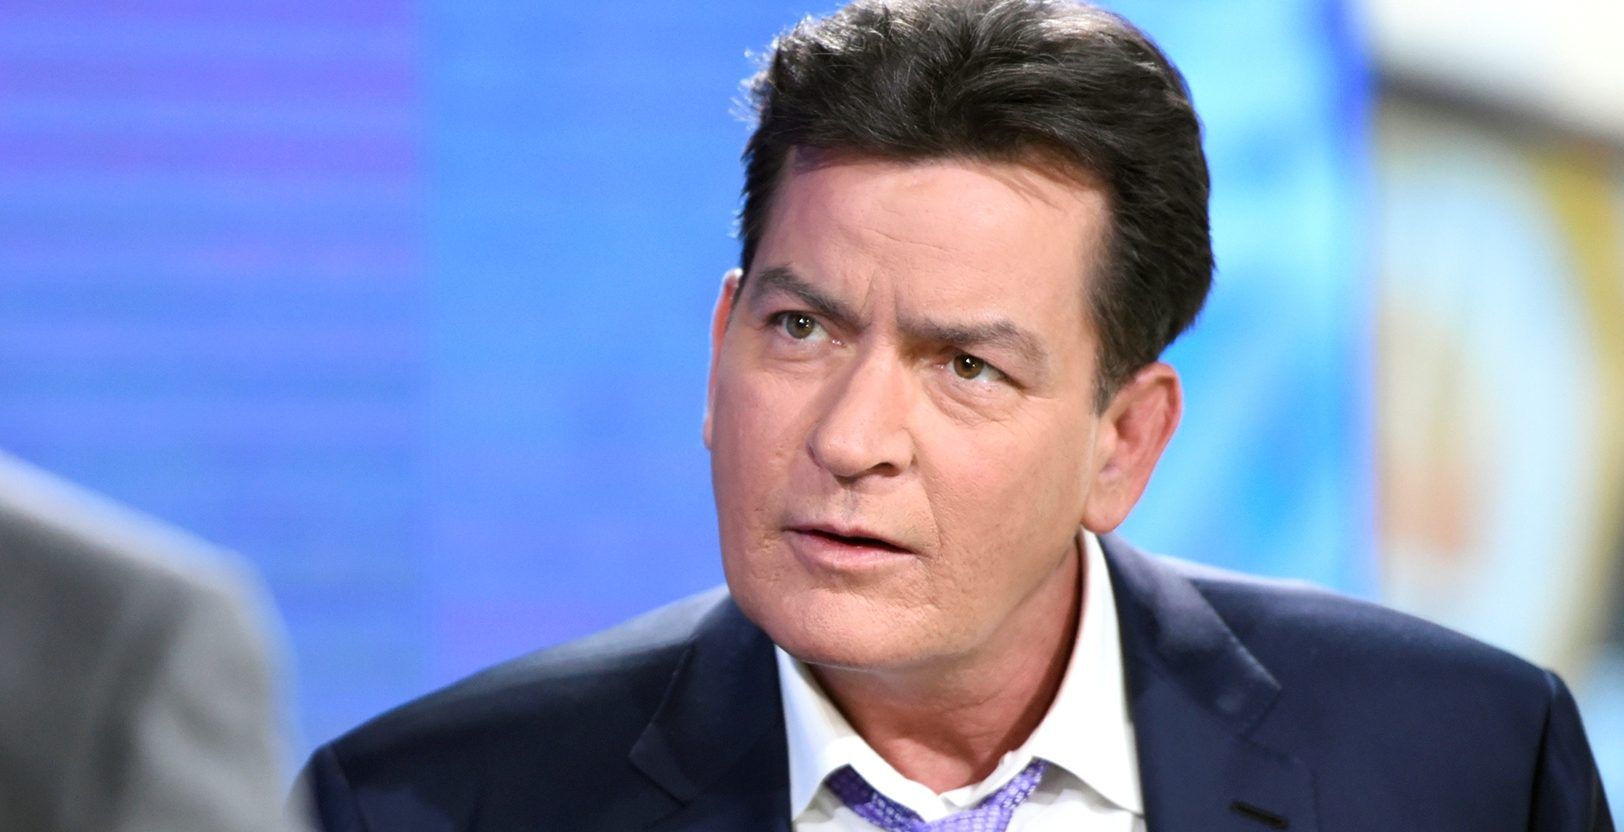 Hollywood cancelou Charlie Sheen?